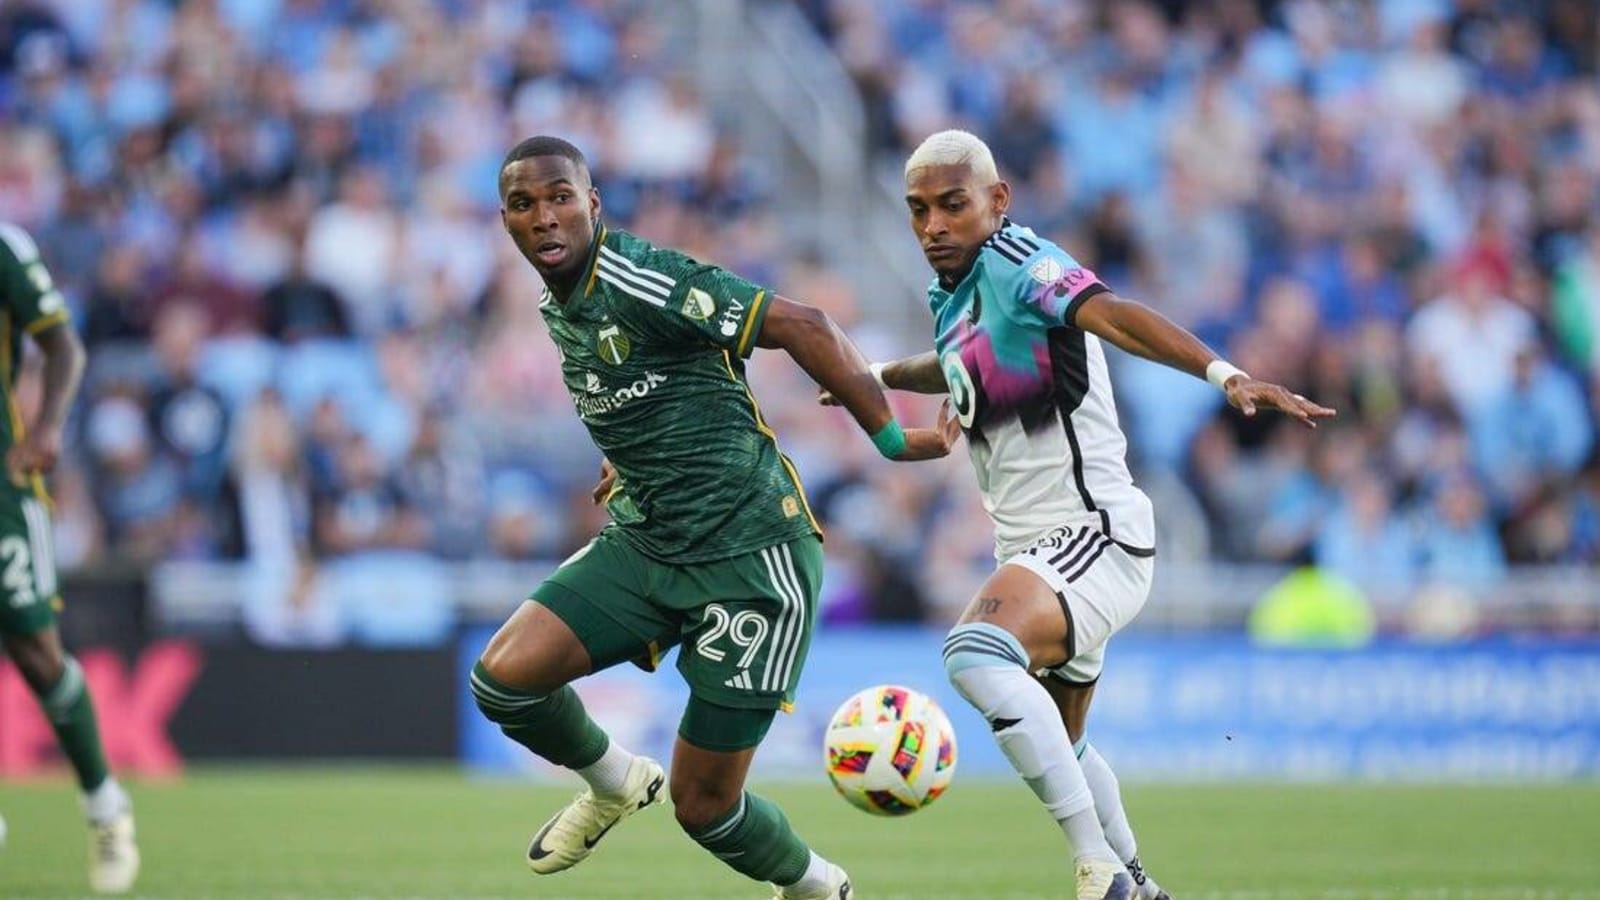 Loons rally, hold off Timbers for 2-1 win